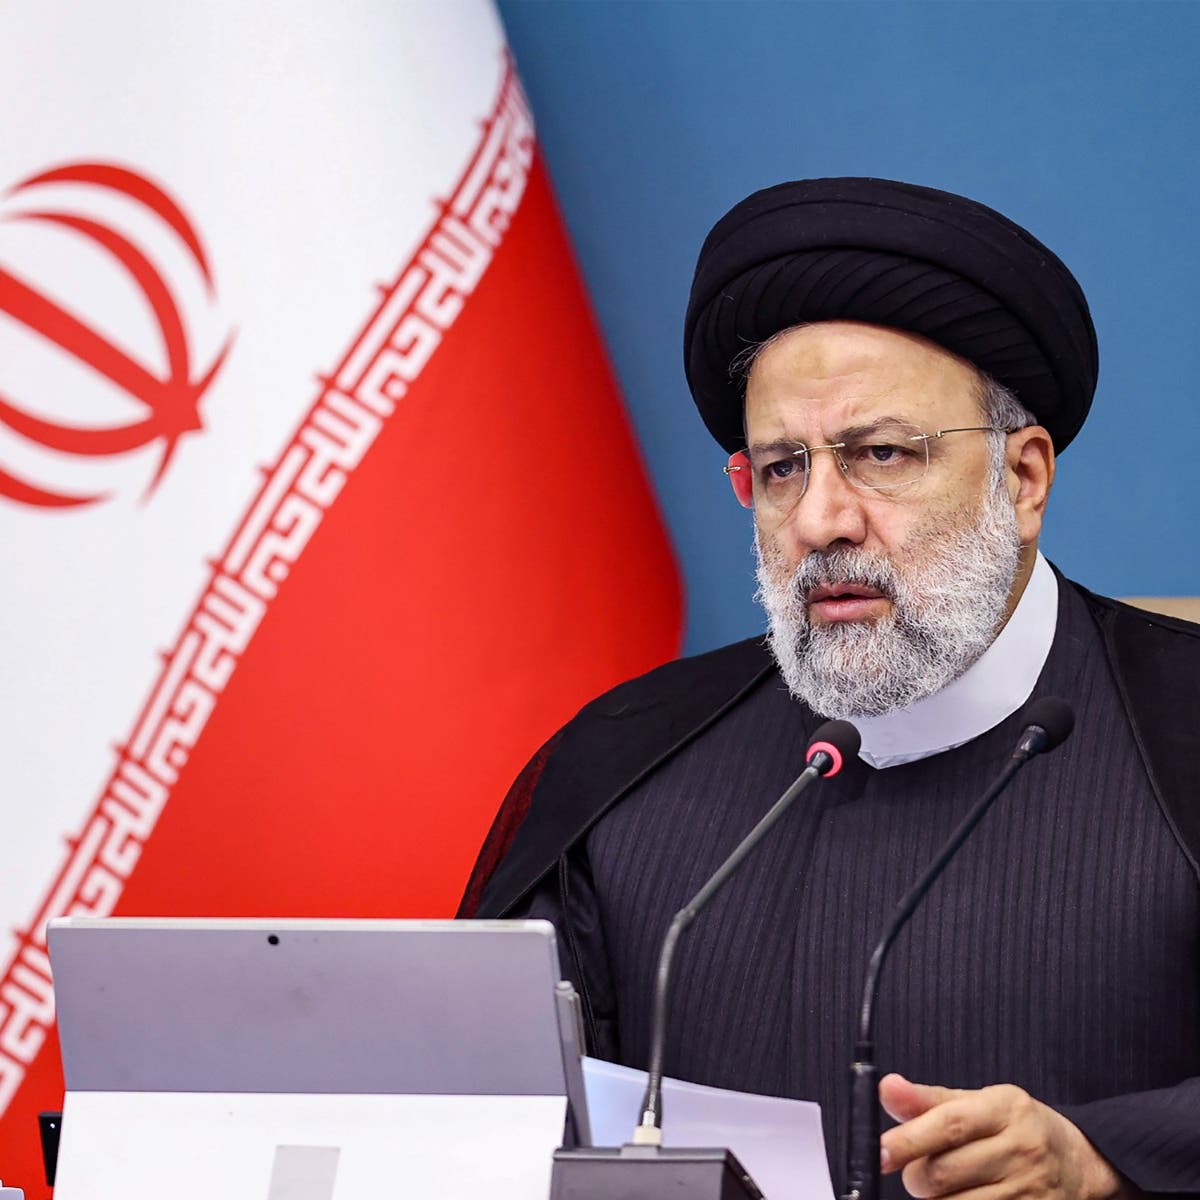 Iran president says Amini's death is ‘tragic incident,’ but ‘chaos’ unacceptable